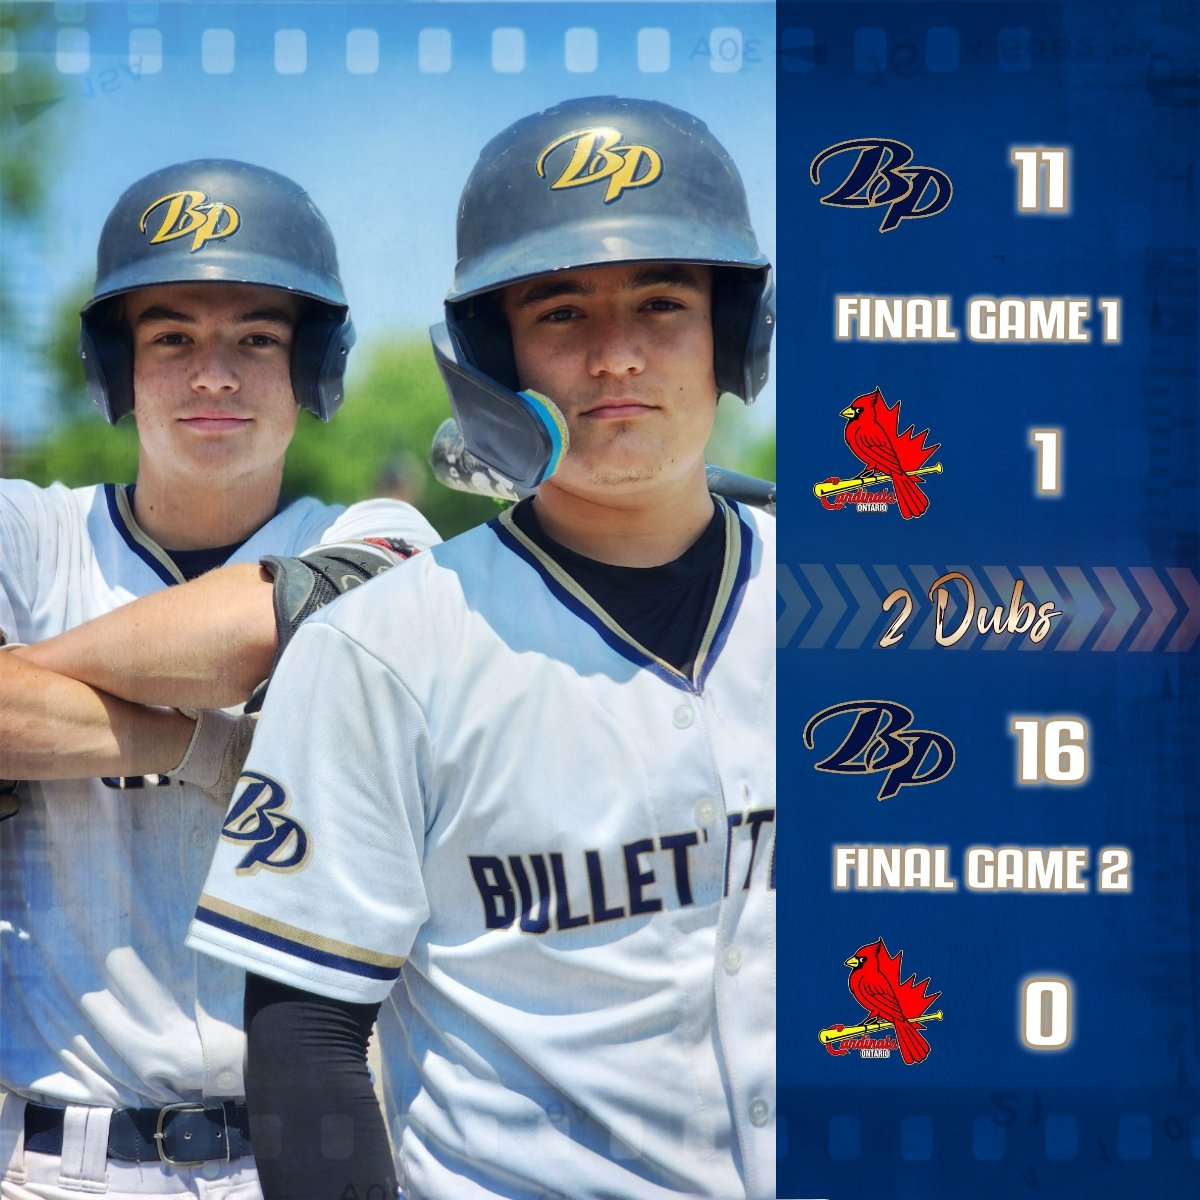 2 Dubs on the day, some highlights @JaxArcuri 3/4, 2BB, 1HBP, 4RBIs @AidanMcDonald77 4/7, 8 RBIs @cupolo11 4IP, 1H, 5SO @colinharris_5 @RyanCulig combined for the shutout in game 2